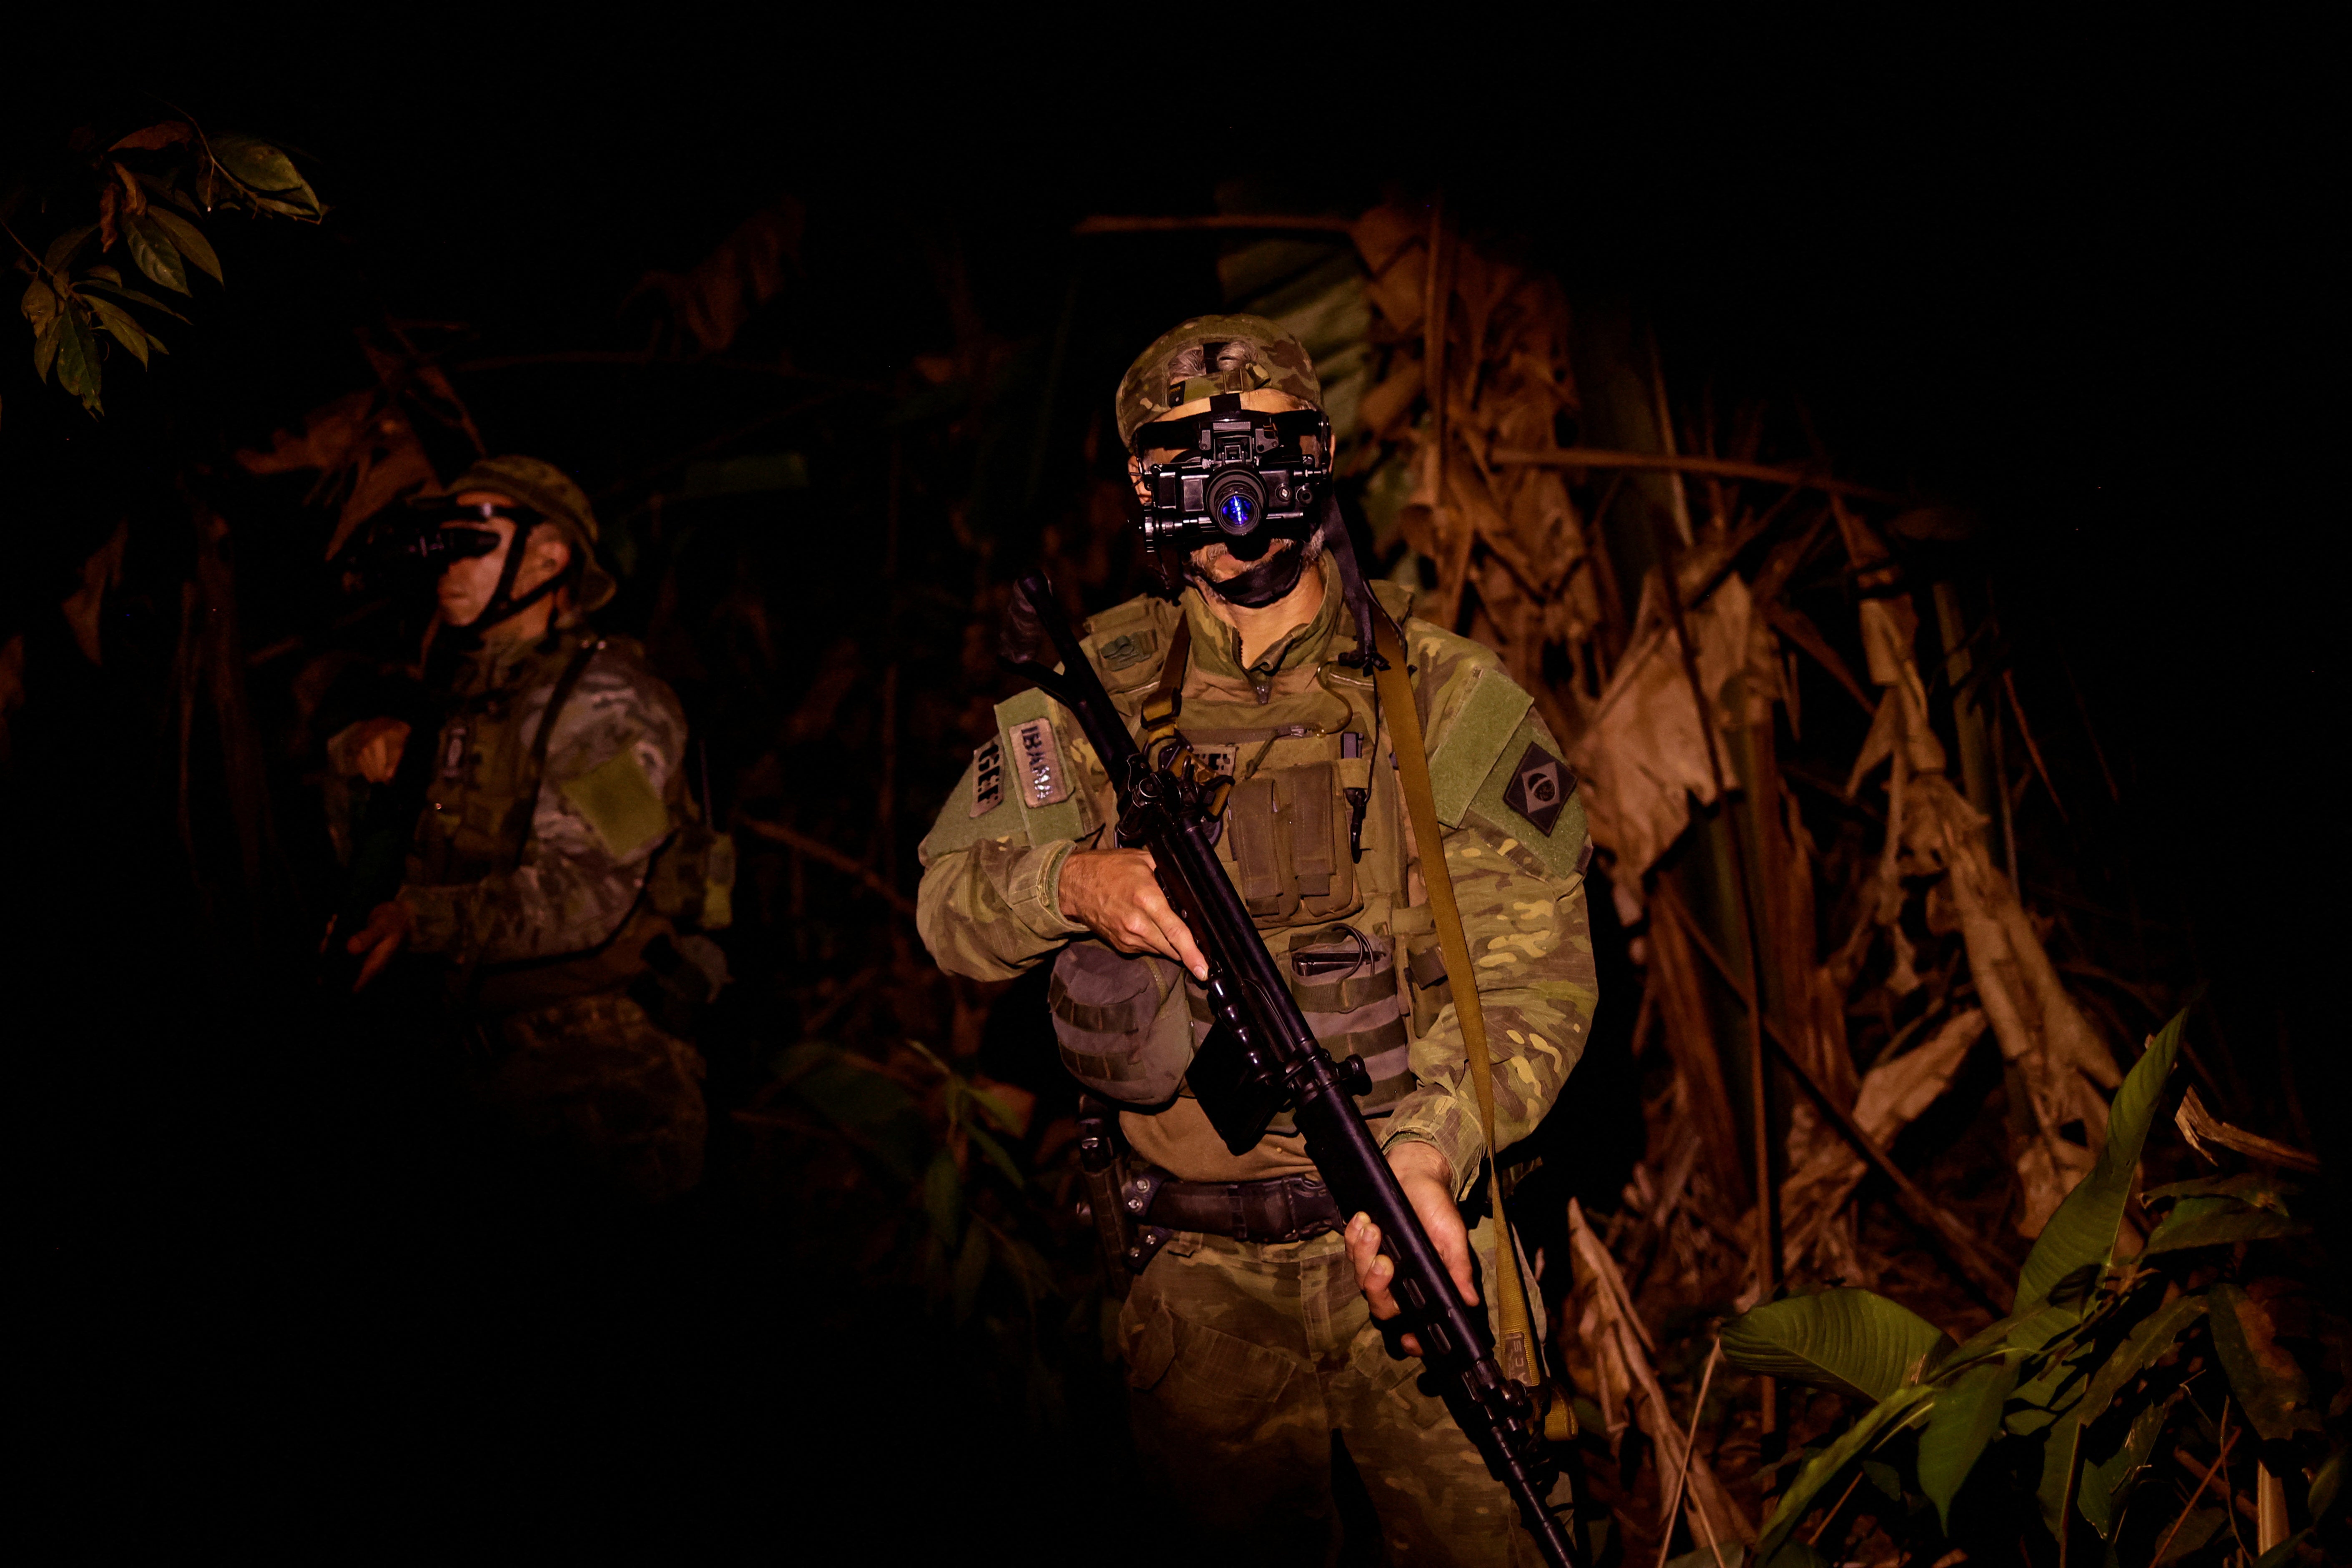 Ibama inspectors use night vision goggles during an operation against illegal mining